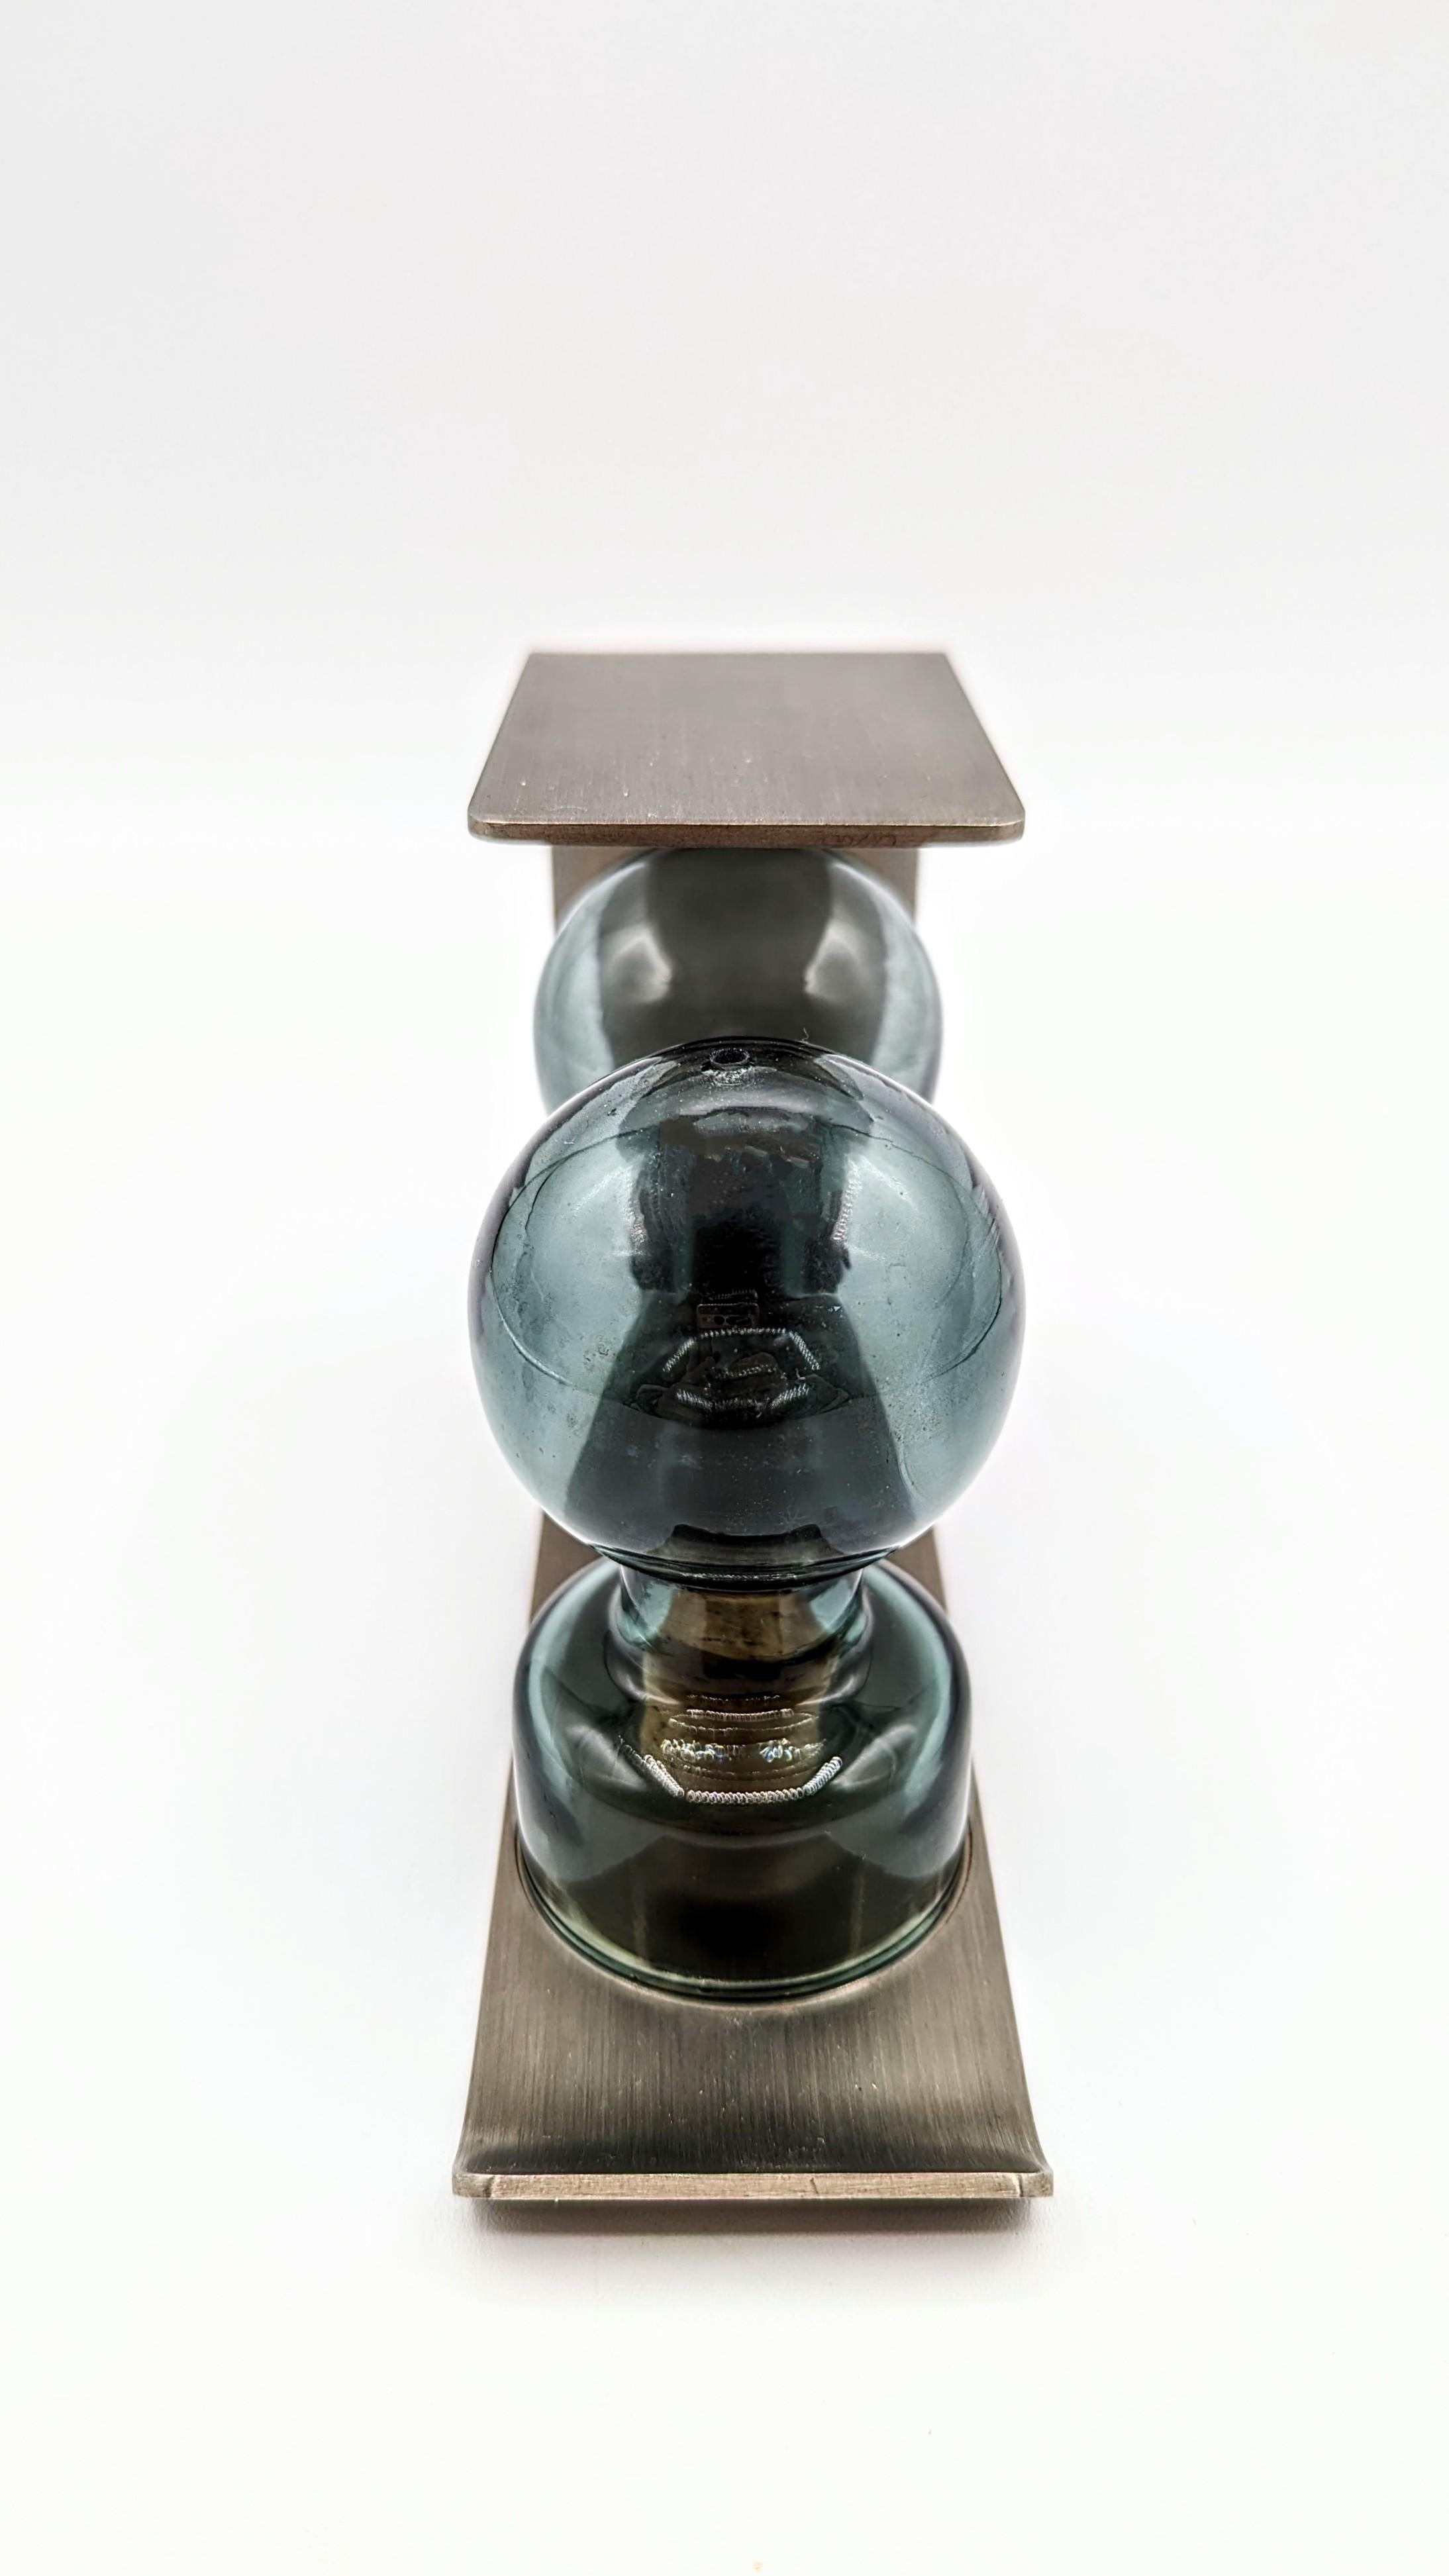 Rare and beautiful salt and pepper set by François Monnet for Kappa manufactured in France in 1970s. Brush aluminum structure with 2 handmade bottles in a incredible blue grey smoked glass. Very design and decorative object for a beautiful table.